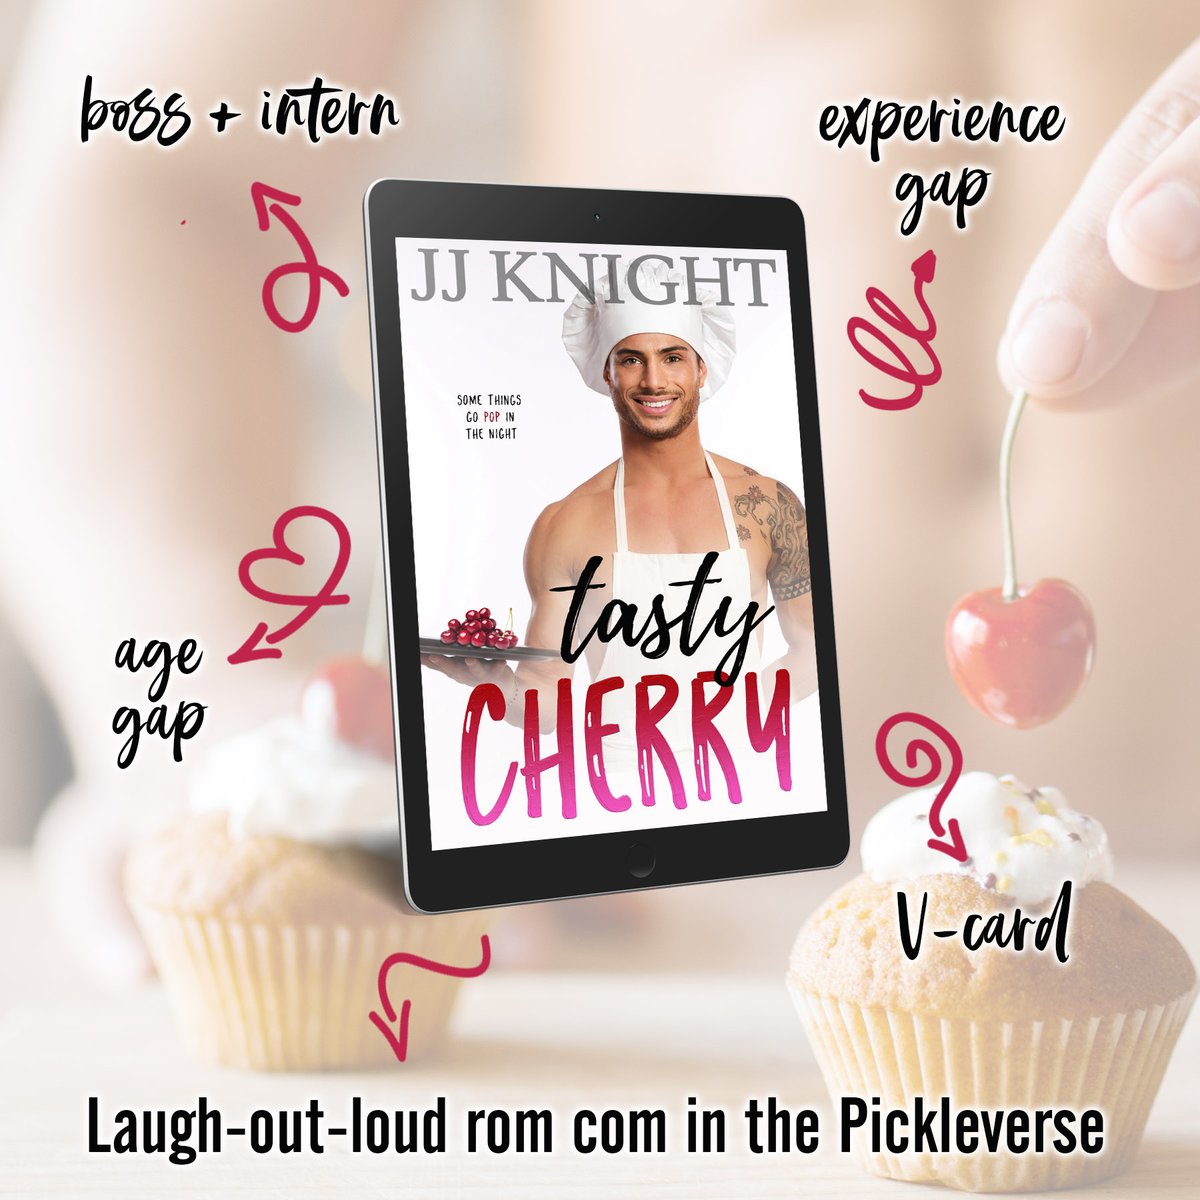 #NEW #KU “Sebastian and Mila’s story will have you from the very beginning, feeling all the emotions.” Tasty Cherry by JJ Knight #Pickleverse bit.ly/3QvuWsc @GiveMeBooksPR